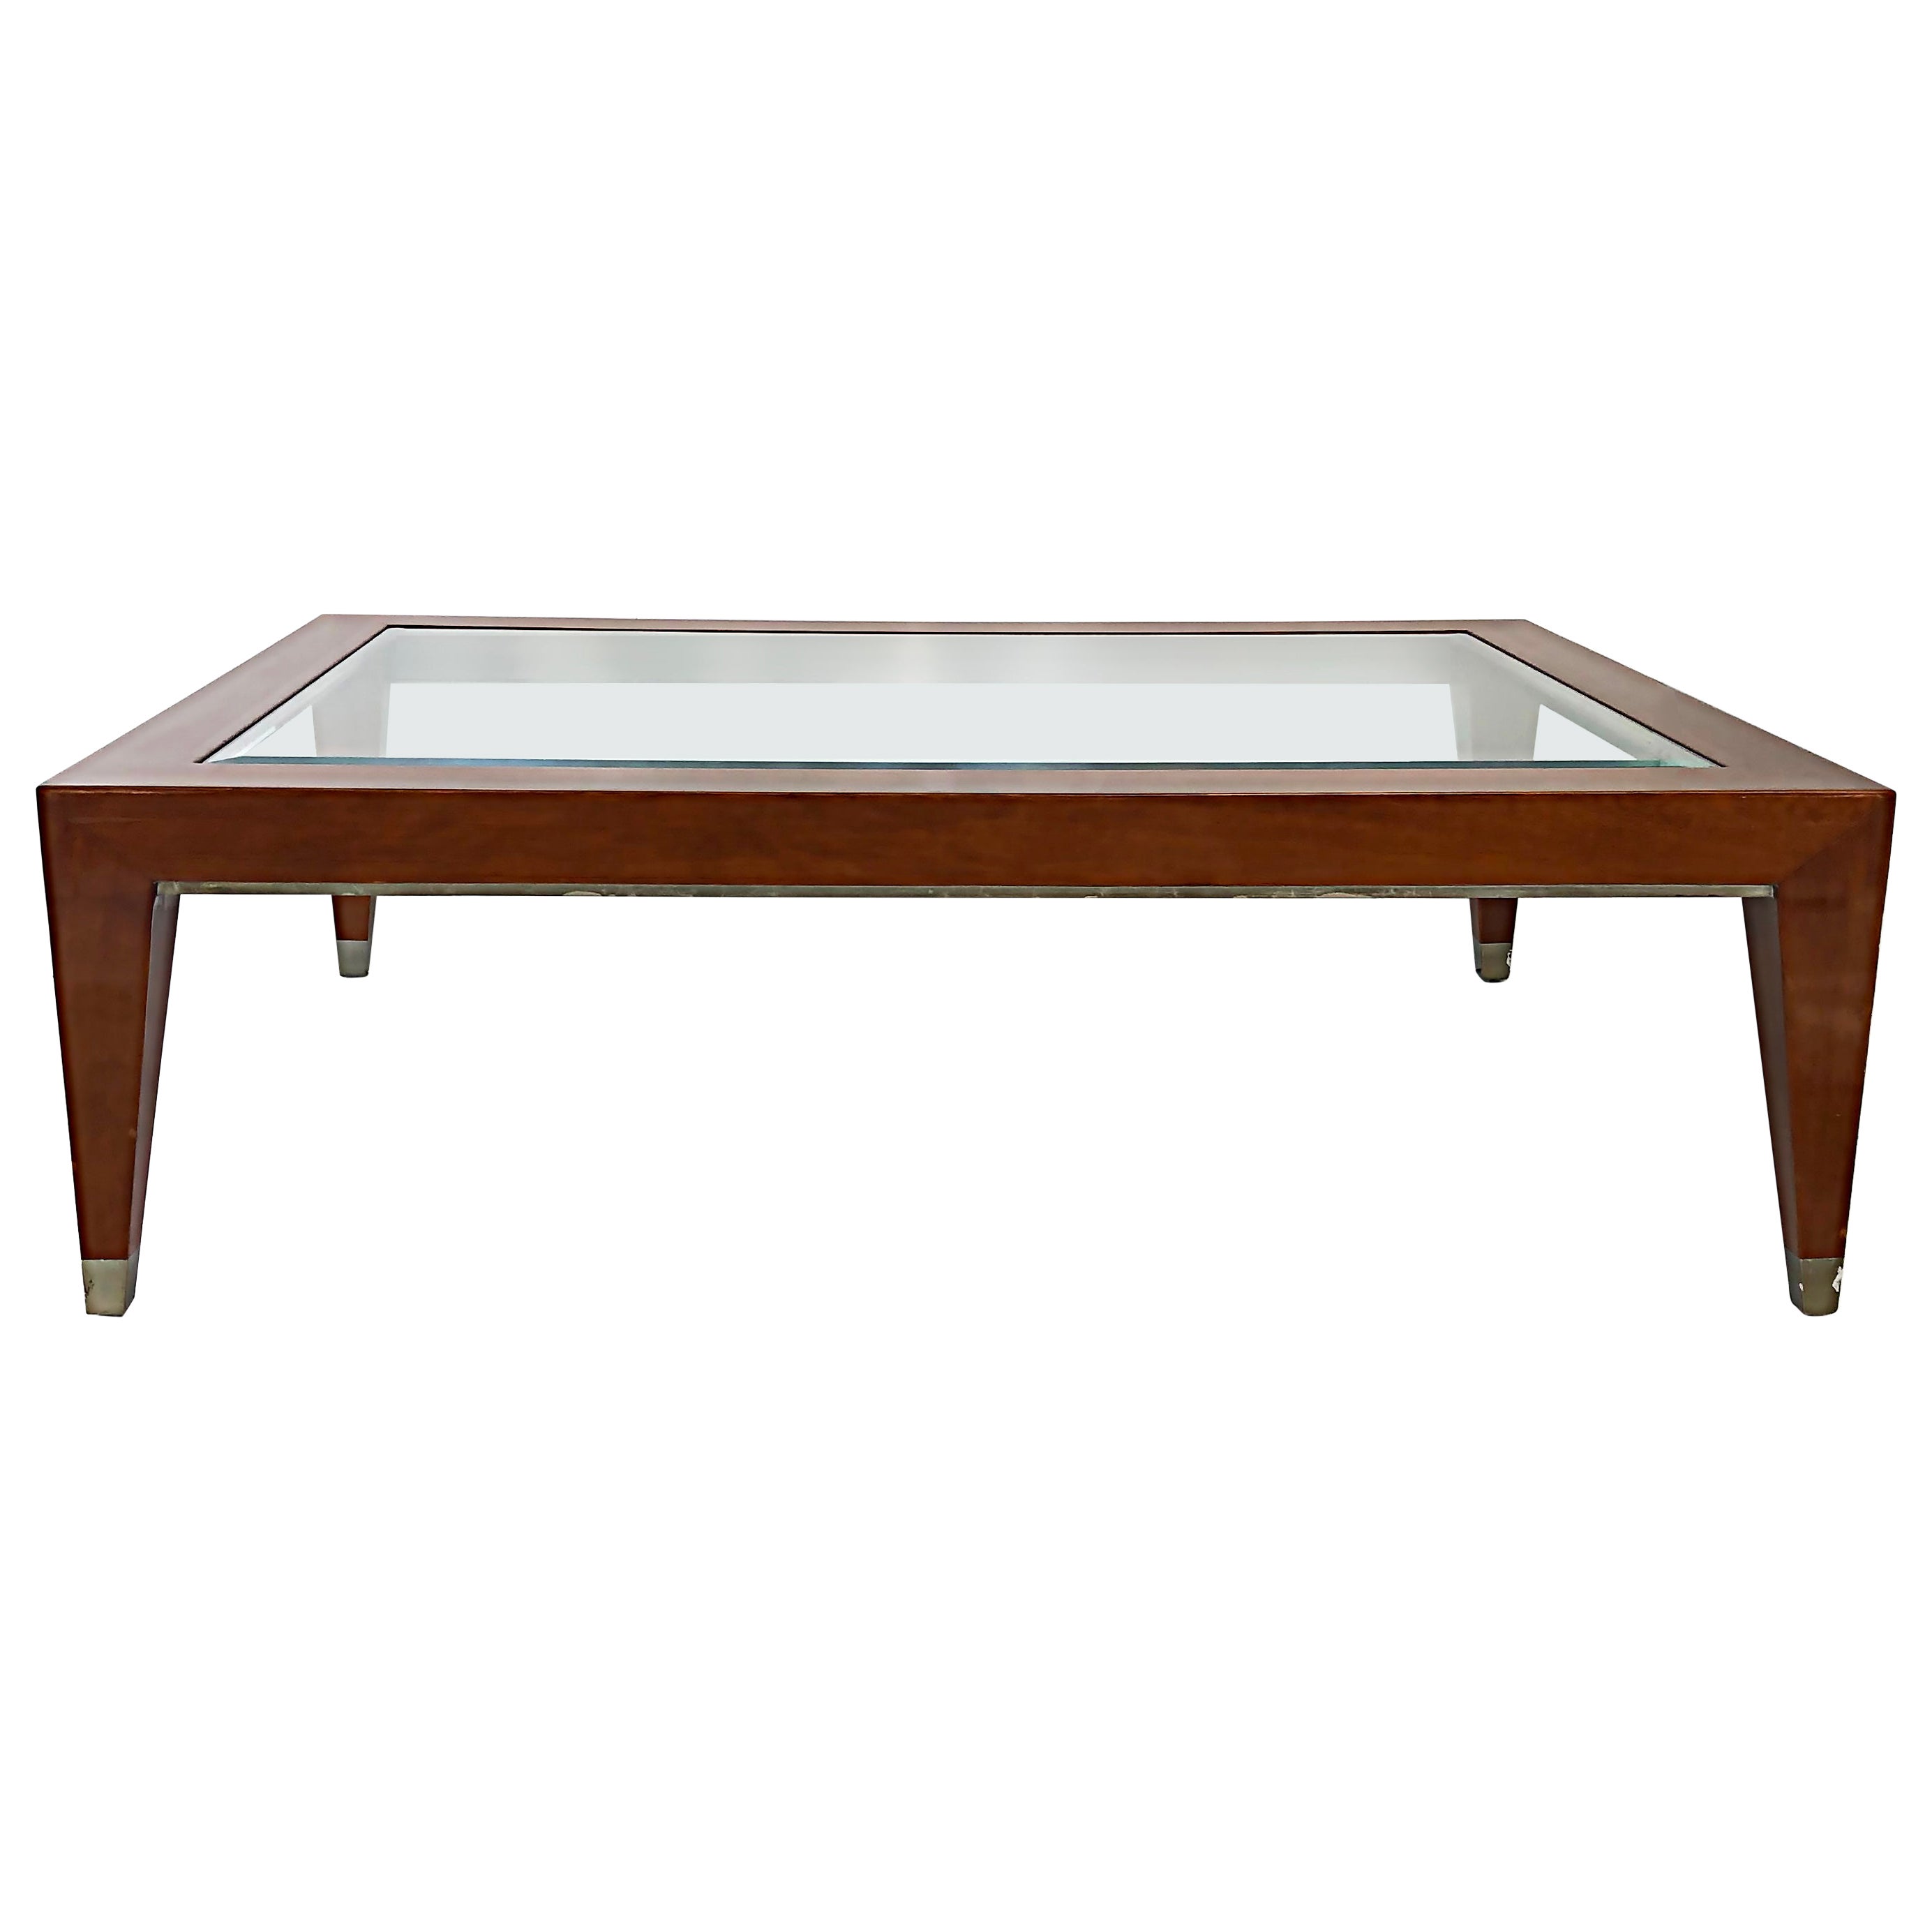 Vintage Enrique Garcel Mahogany Coffee Table with Inset Beveled Glass Top  For Sale